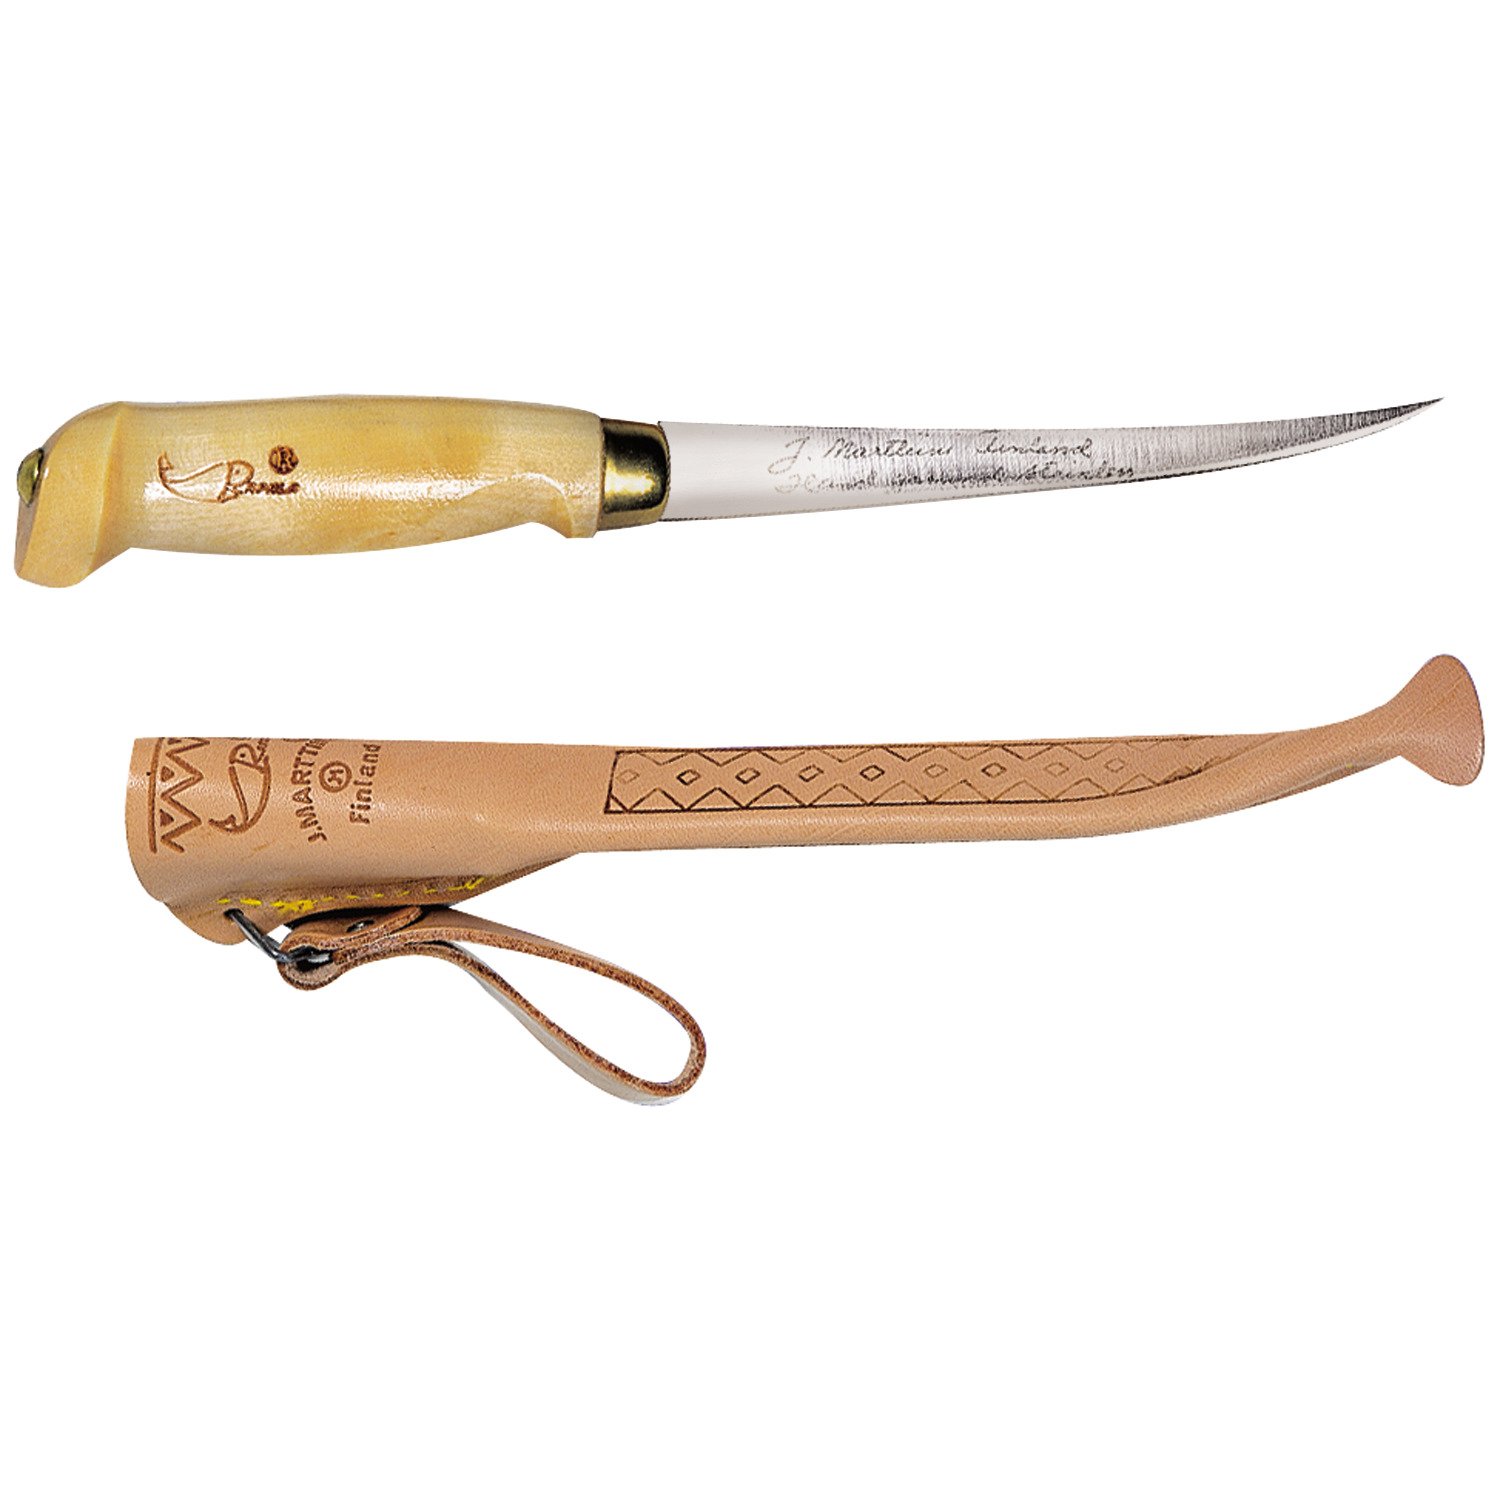 Rapala Tools: Fillet Knives, Lines & Scales